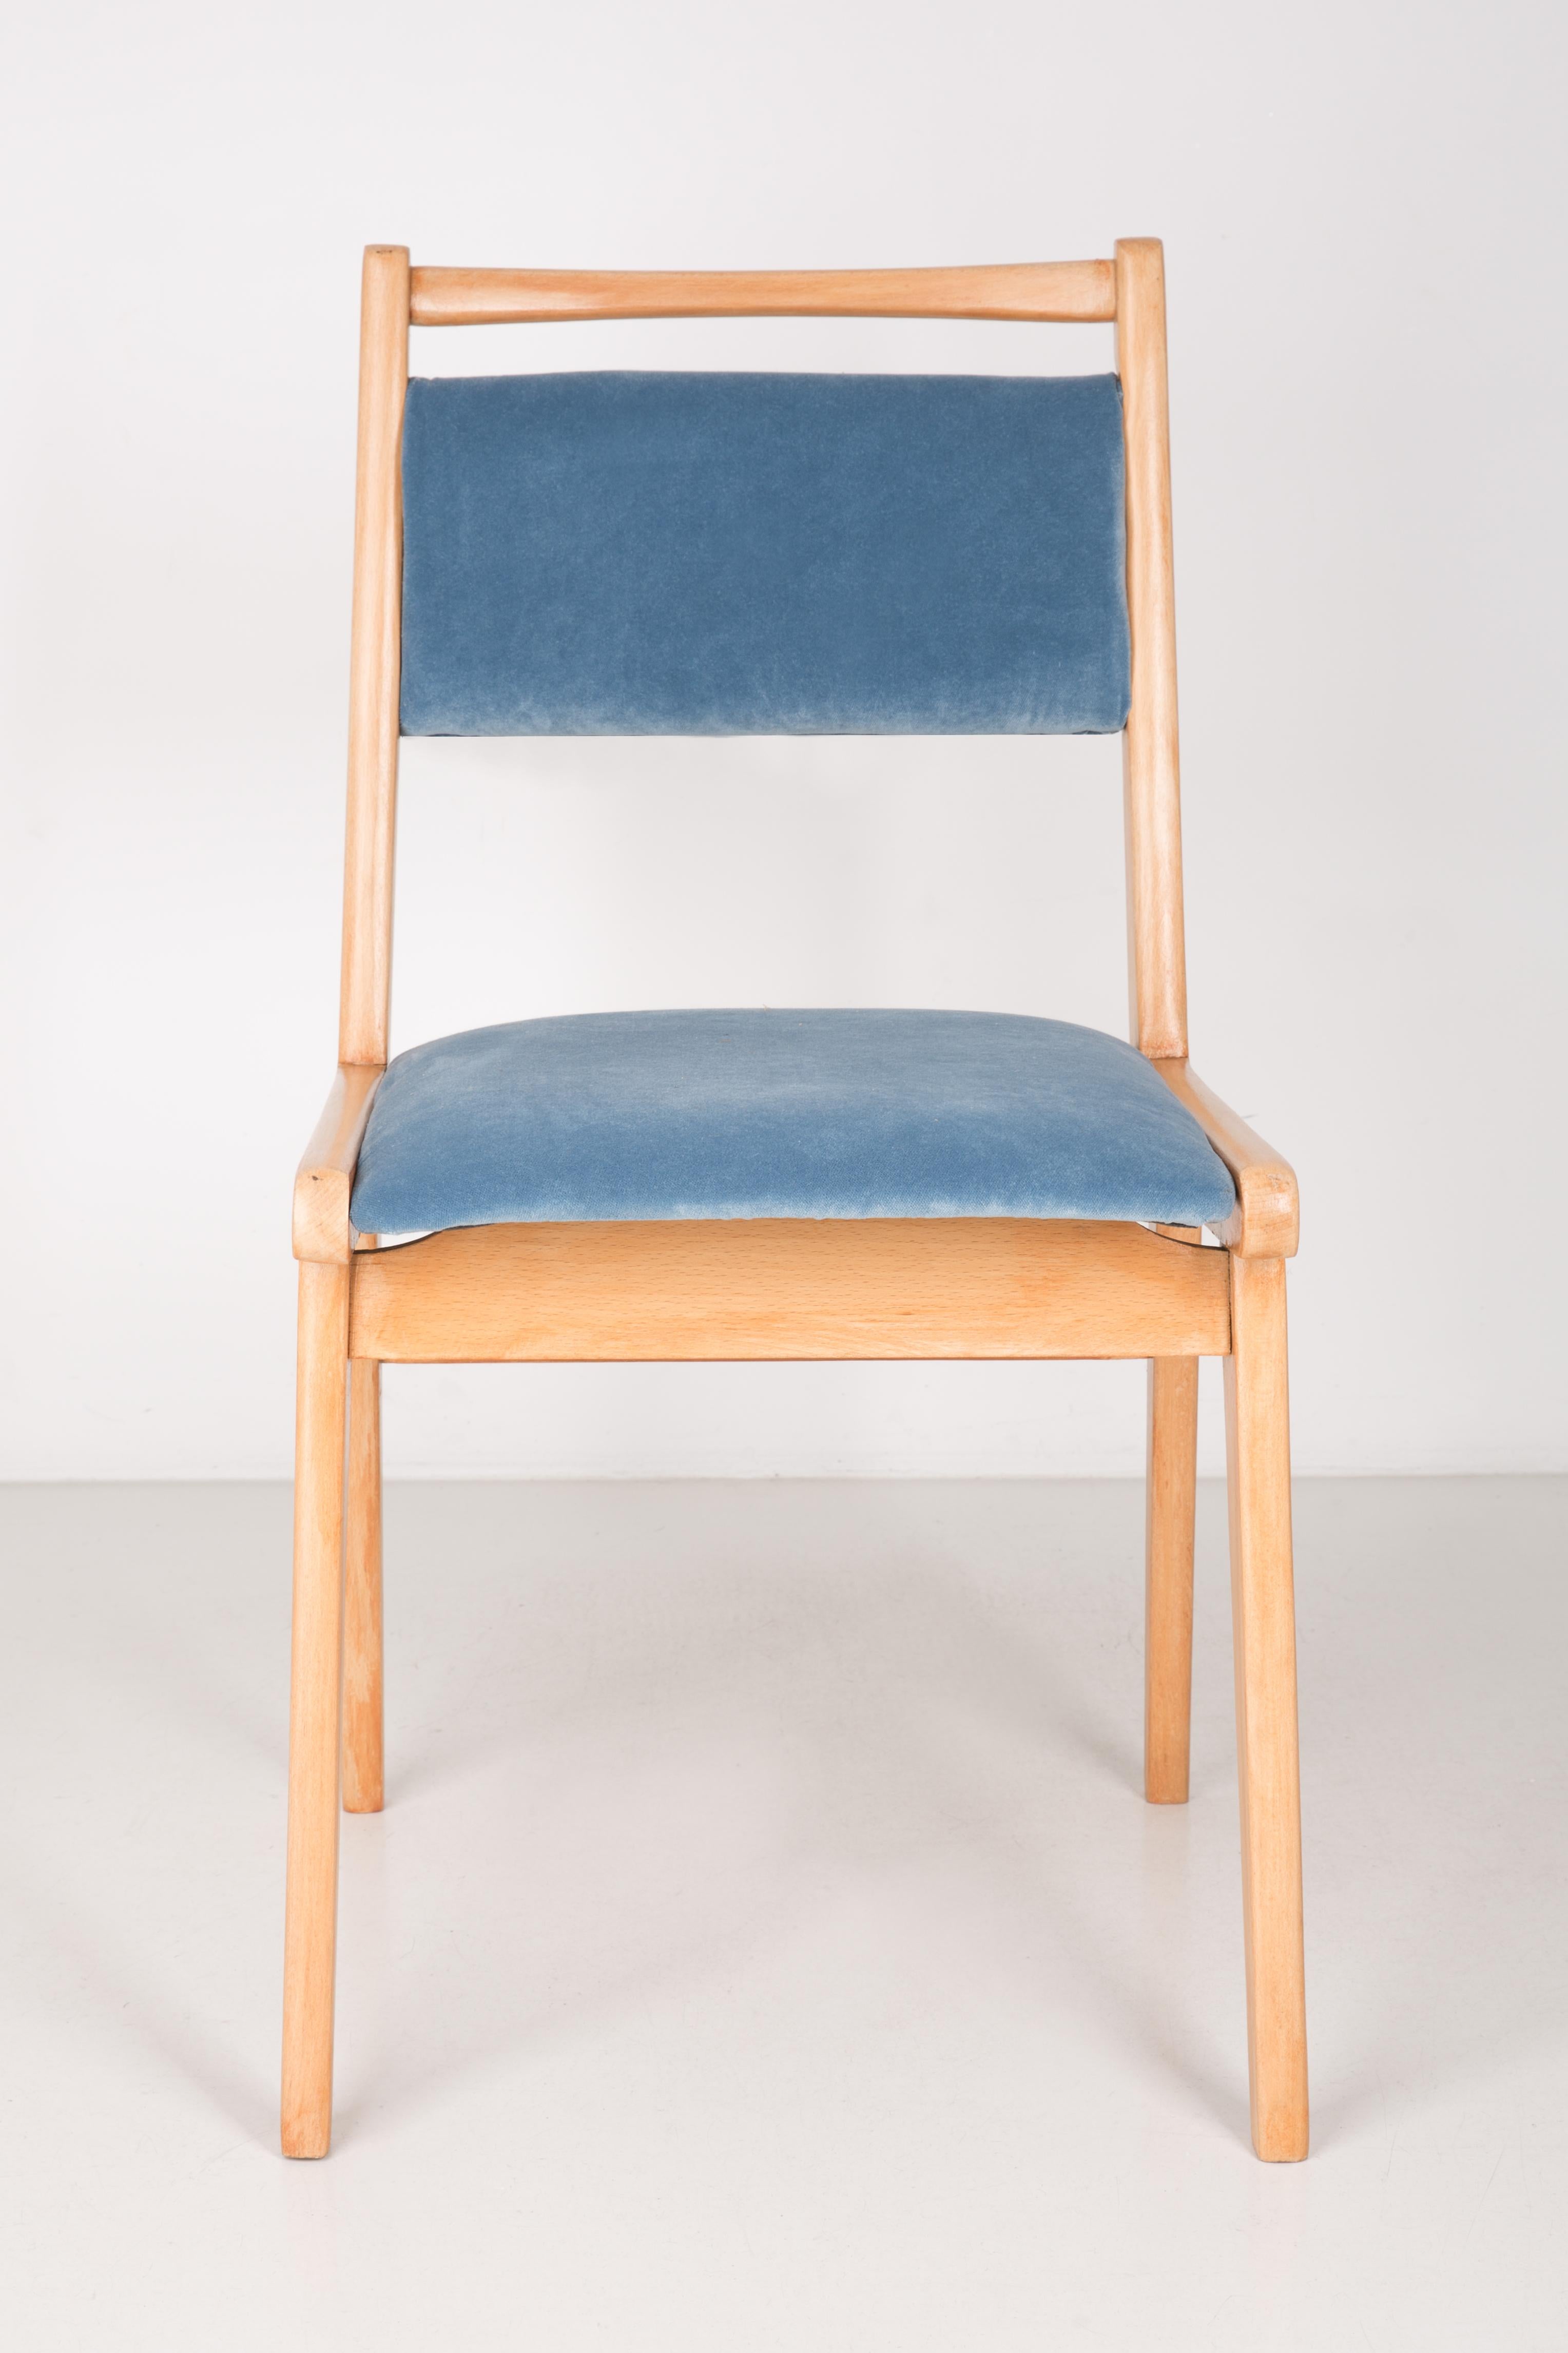 Chair designed by prof. Rajmund Halas. Made of beechwood. Chair is after a complete upholstery renovation, the woodwork has been refreshed. Seat and back is dressed in a light blue, durable and pleasant to the touch velvet fabric. Chair is stable